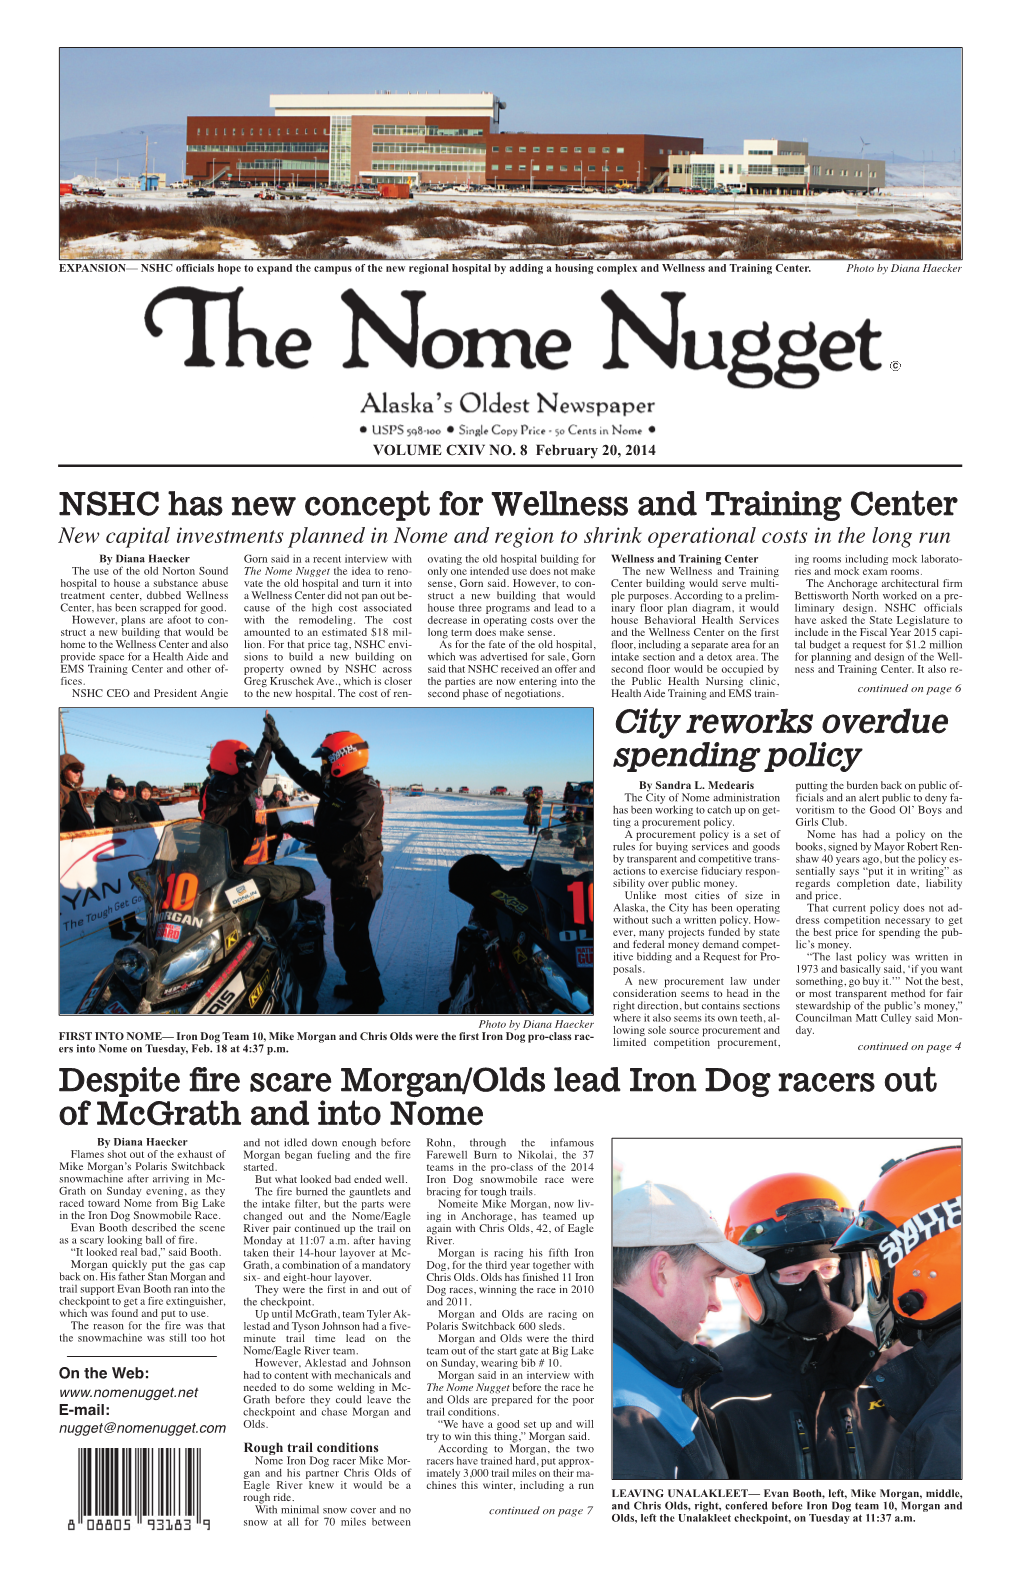 City Reworks Overdue Spending Policy Despite Fire Scare Morgan/Olds Lead Iron Dog Racers out of Mcgrath and Into Nome NSHC Has N